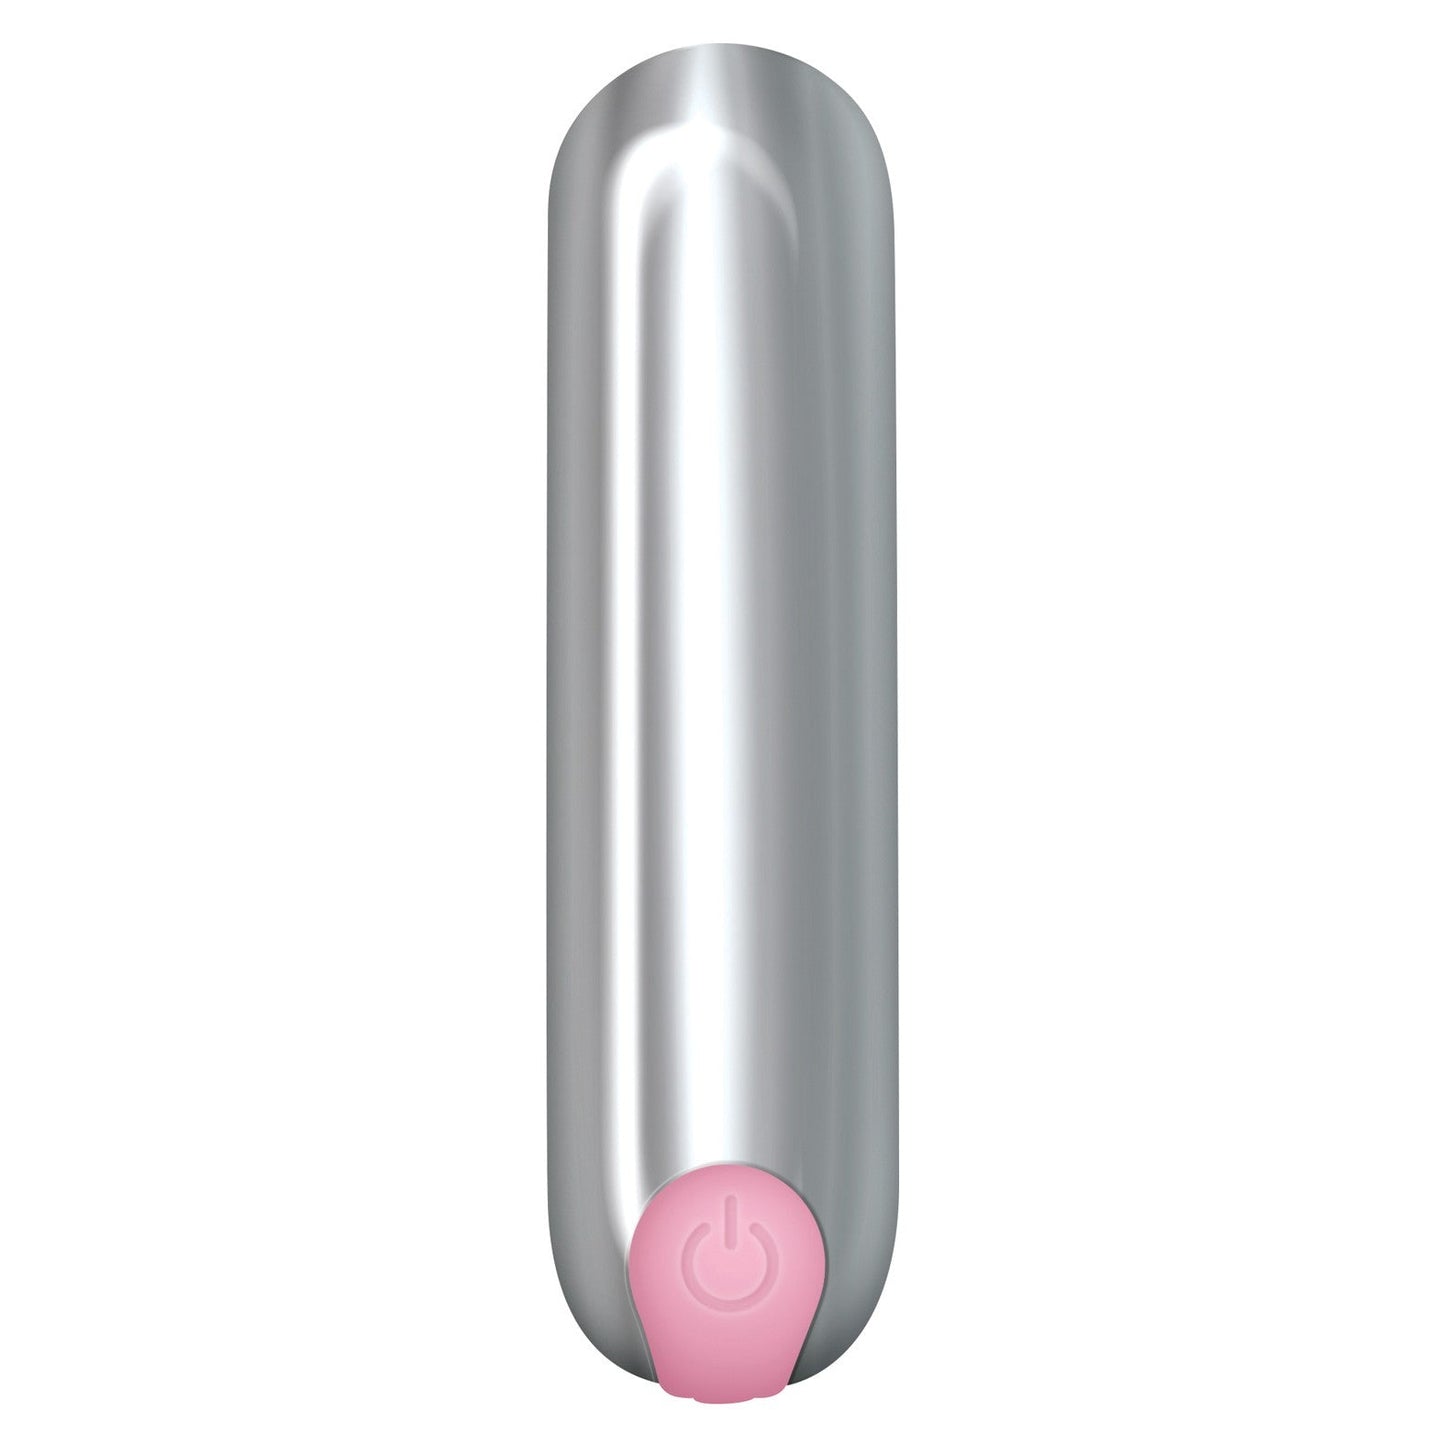 Adam & Eve Silicone Finger Vibe - Pink